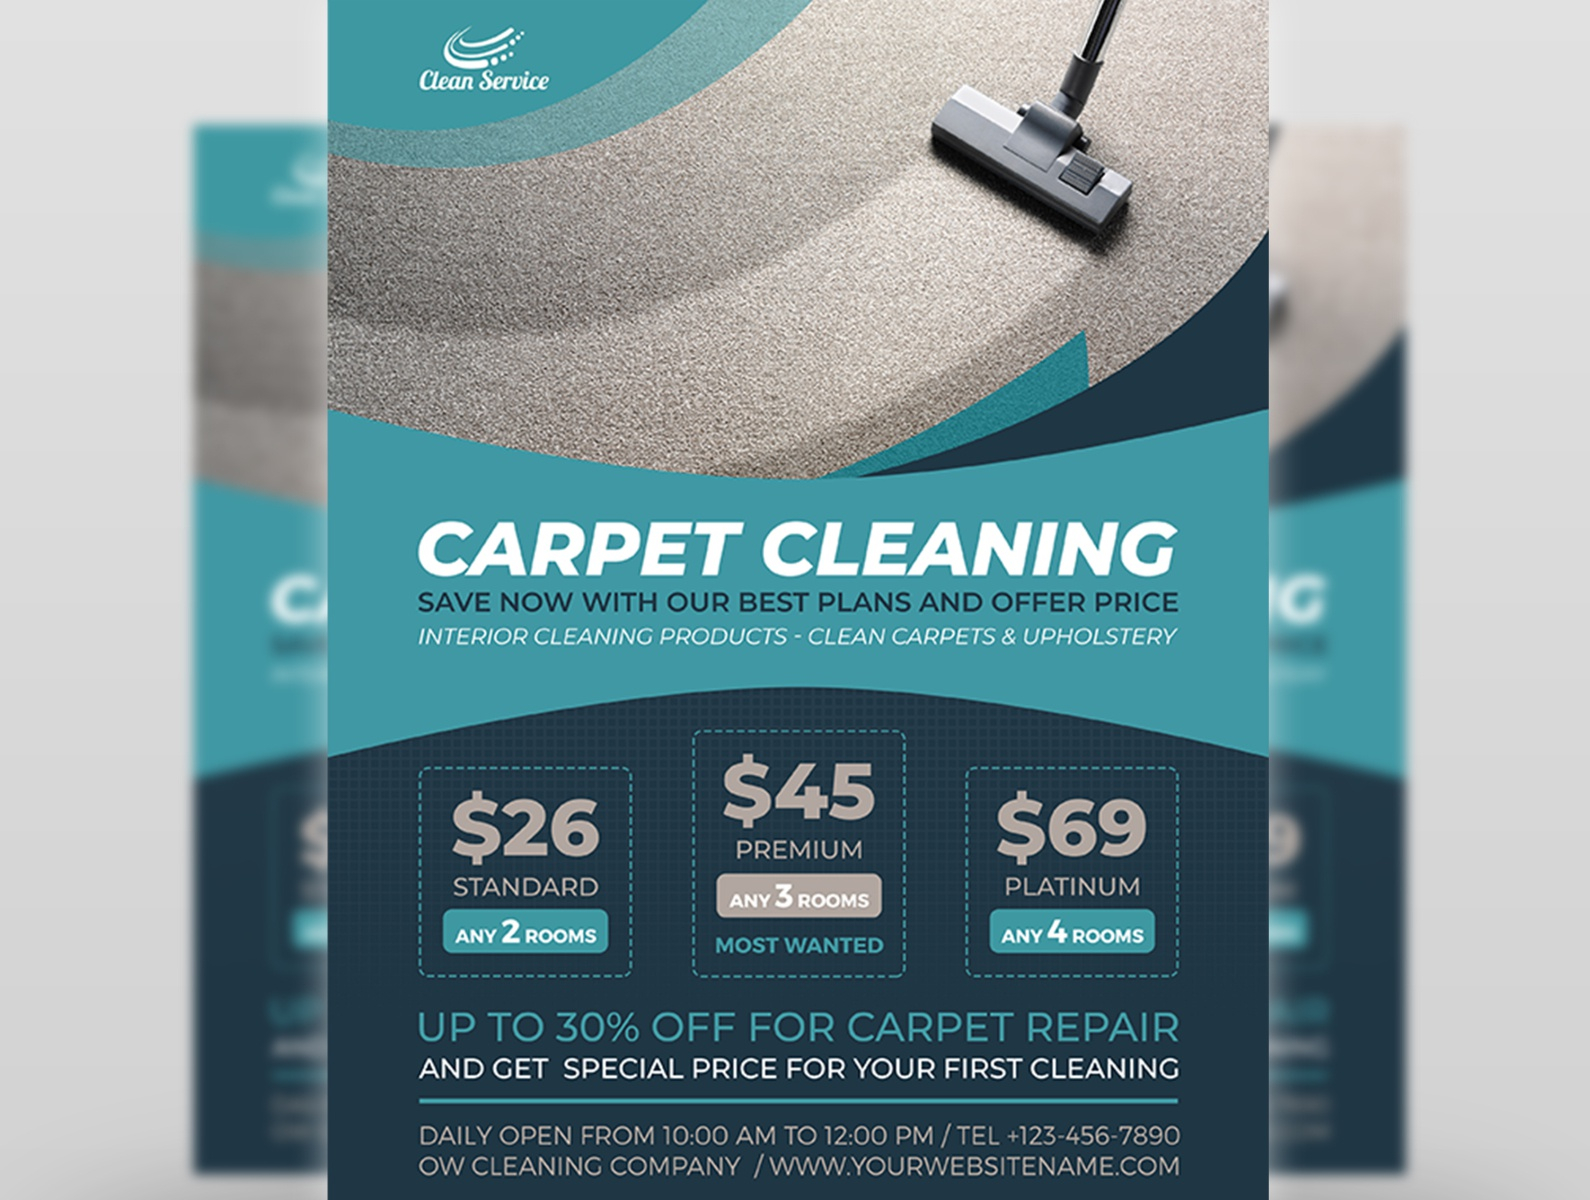 Carpet Cleaning Services Flyer Template by OWPictures on Dribbble For Window Cleaning Flyer Template With Regard To Window Cleaning Flyer Template